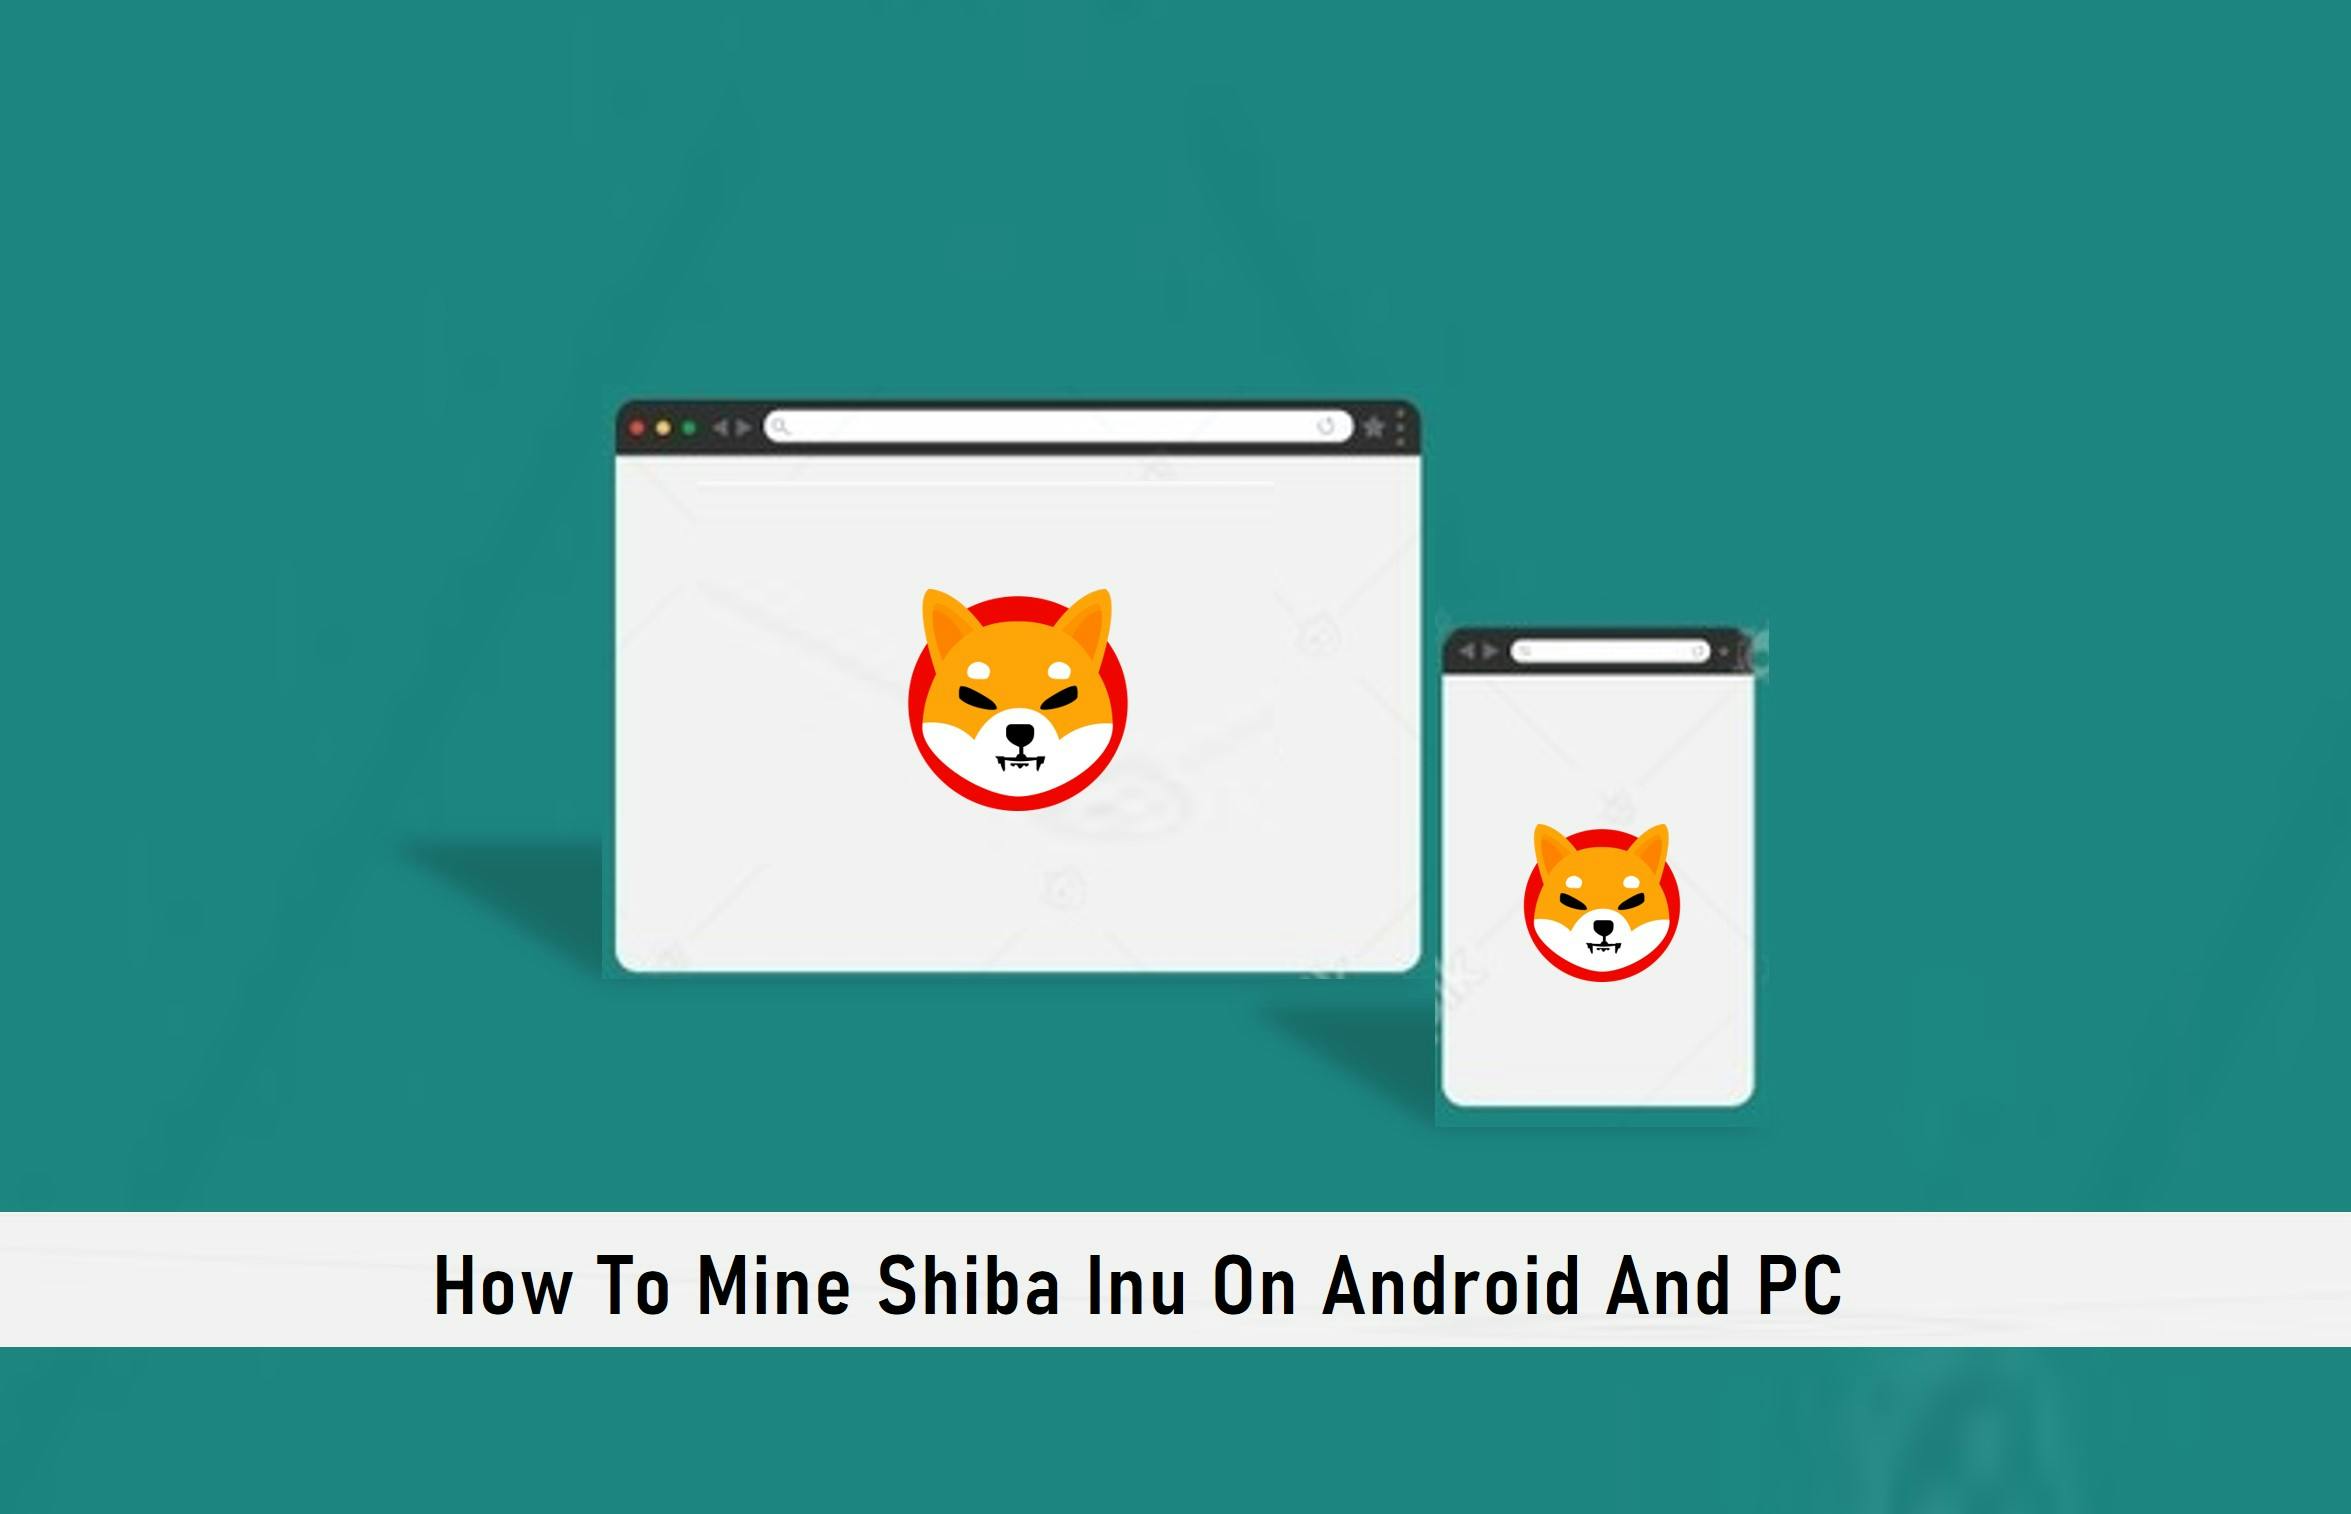 How To Mine Shiba Inu On Android And PC